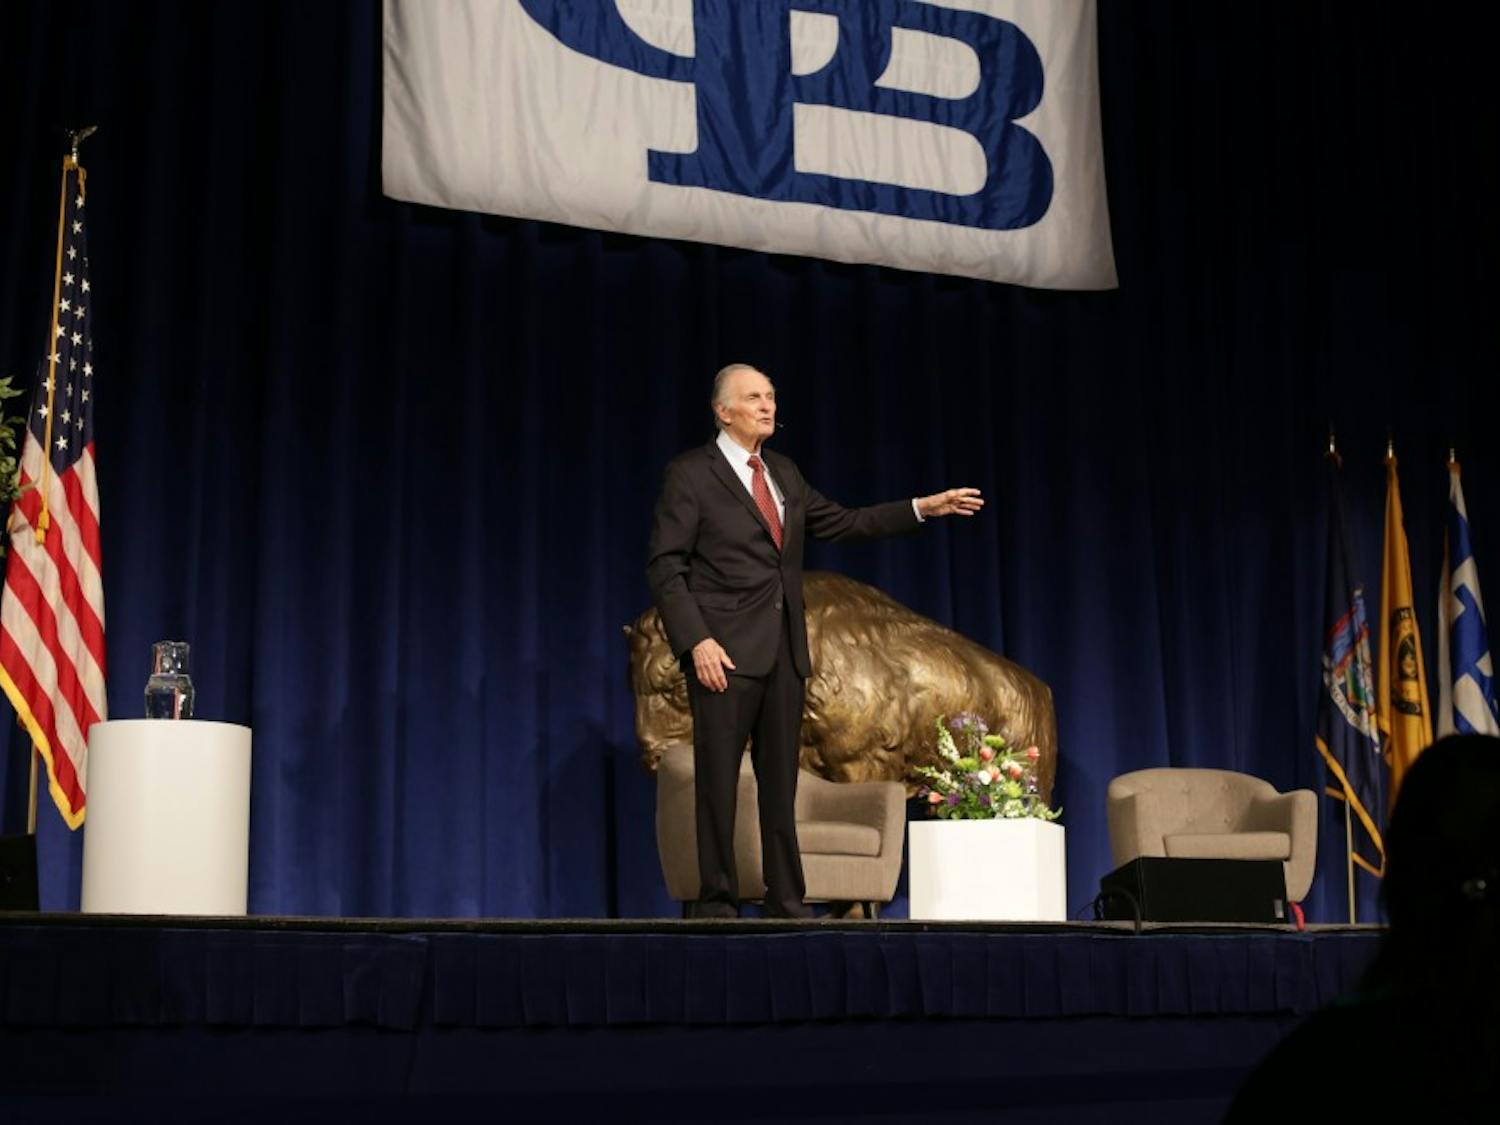 Actor, director, screenwriter and science communicator Alan Alda spoke at Alumni Arena Wednesday night as part of UB’s 31st annual Distinguished Speakers Series. Alda discussed the value of clear and empathetic scientific communication.